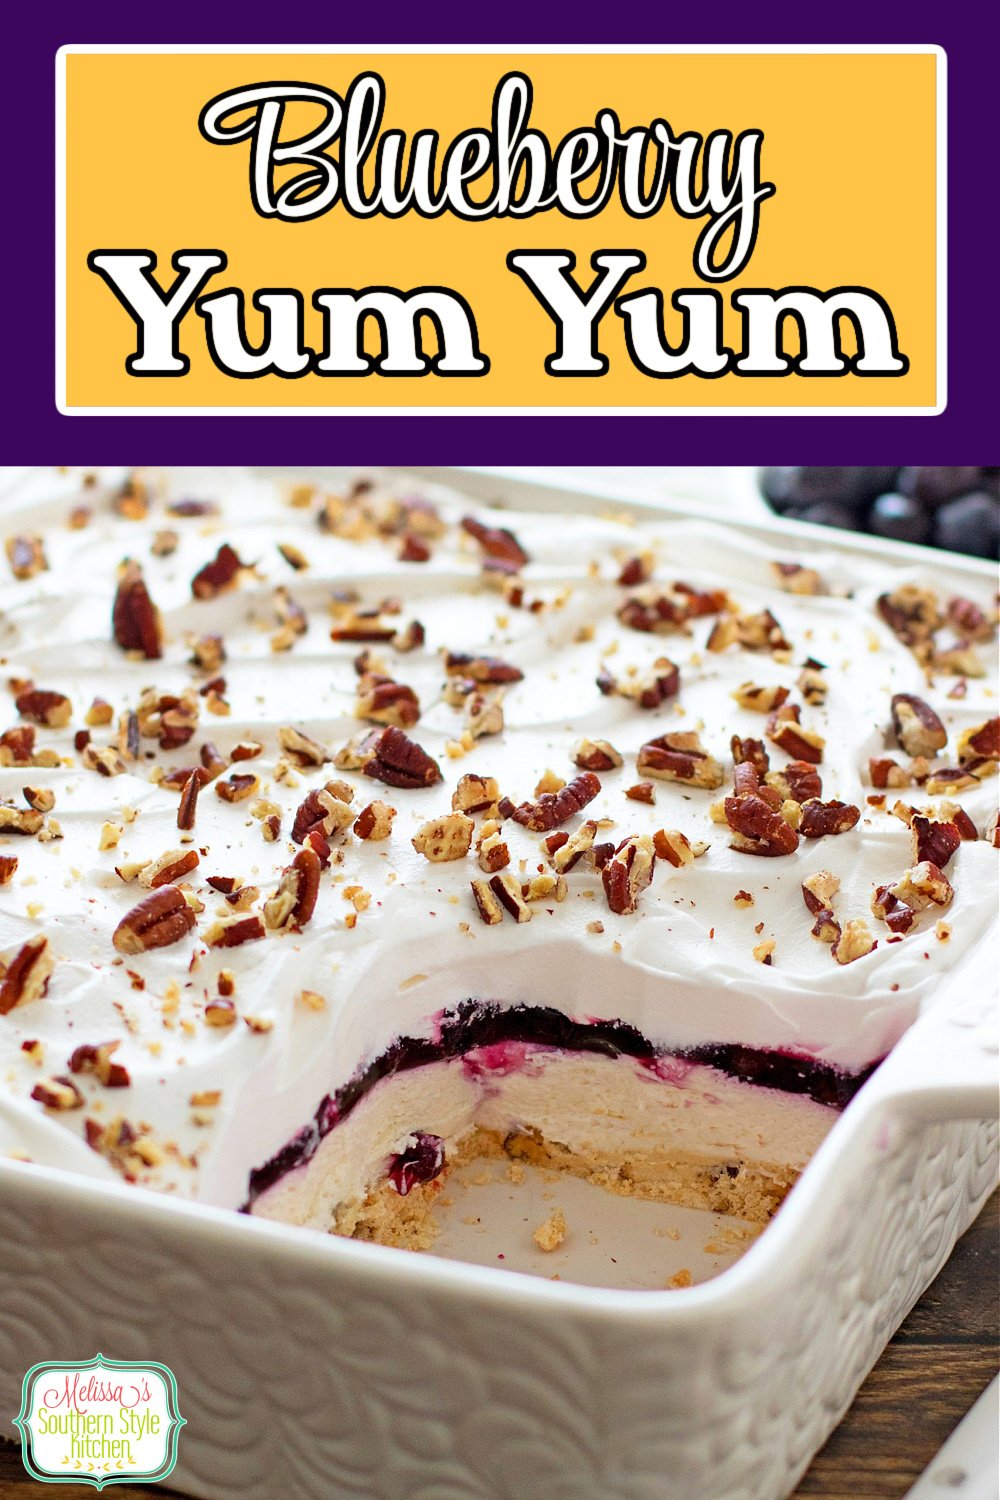 This luscious layered Blueberry Yum Yum is sure to satisfy your sweets craving #blueberryyumyhum #blueberrydesserts #blueberries #desserts #dessertfoodrecipes #southernfood #southernrecipes via @melissasssk